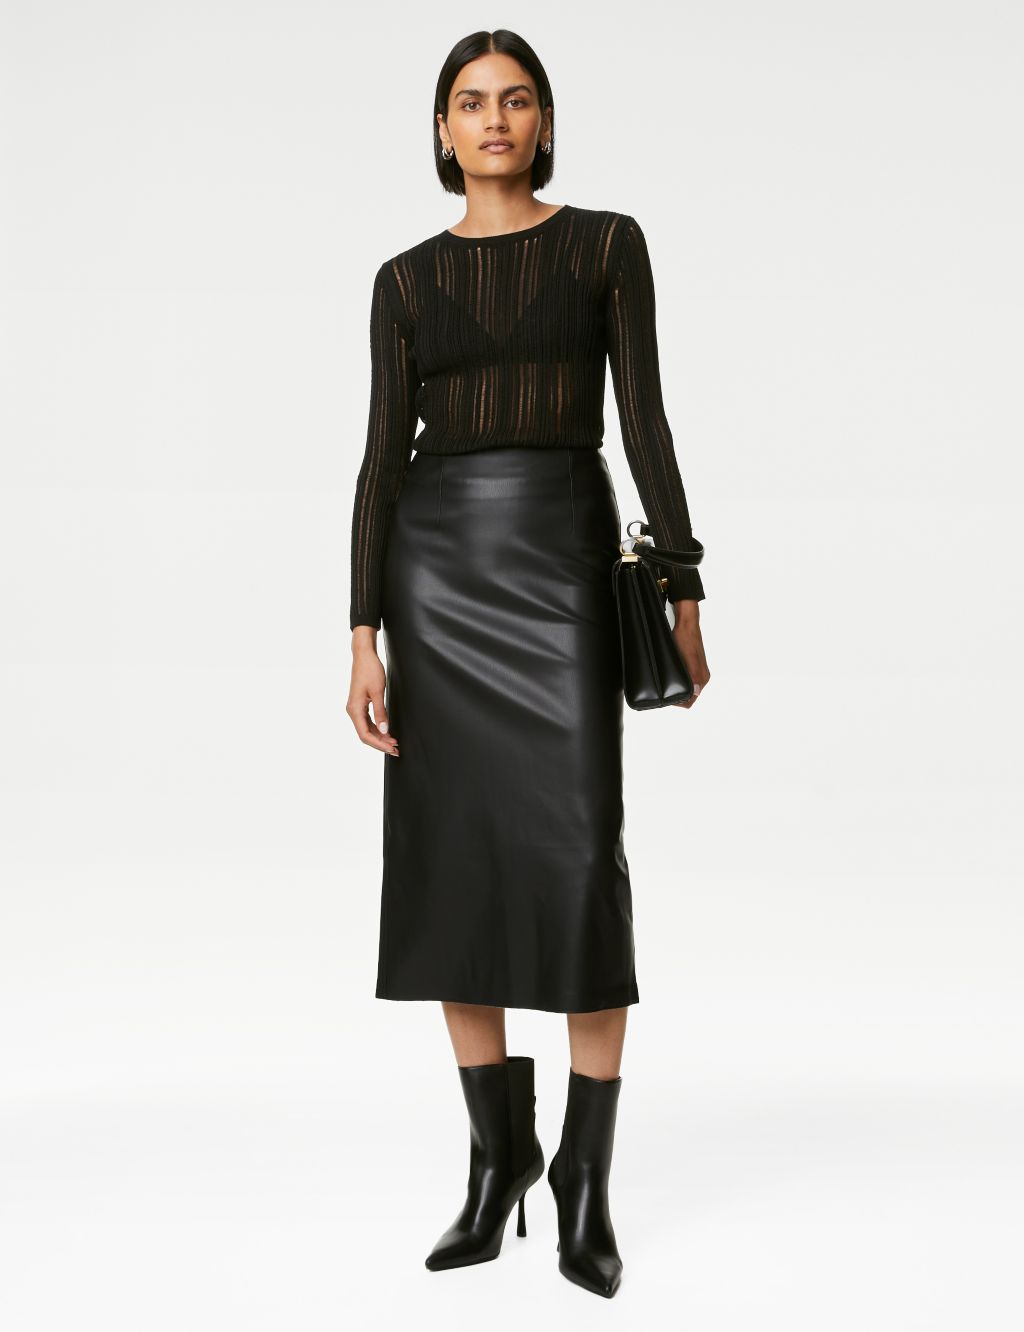 Leather Look Midaxi Pencil Skirt image 1